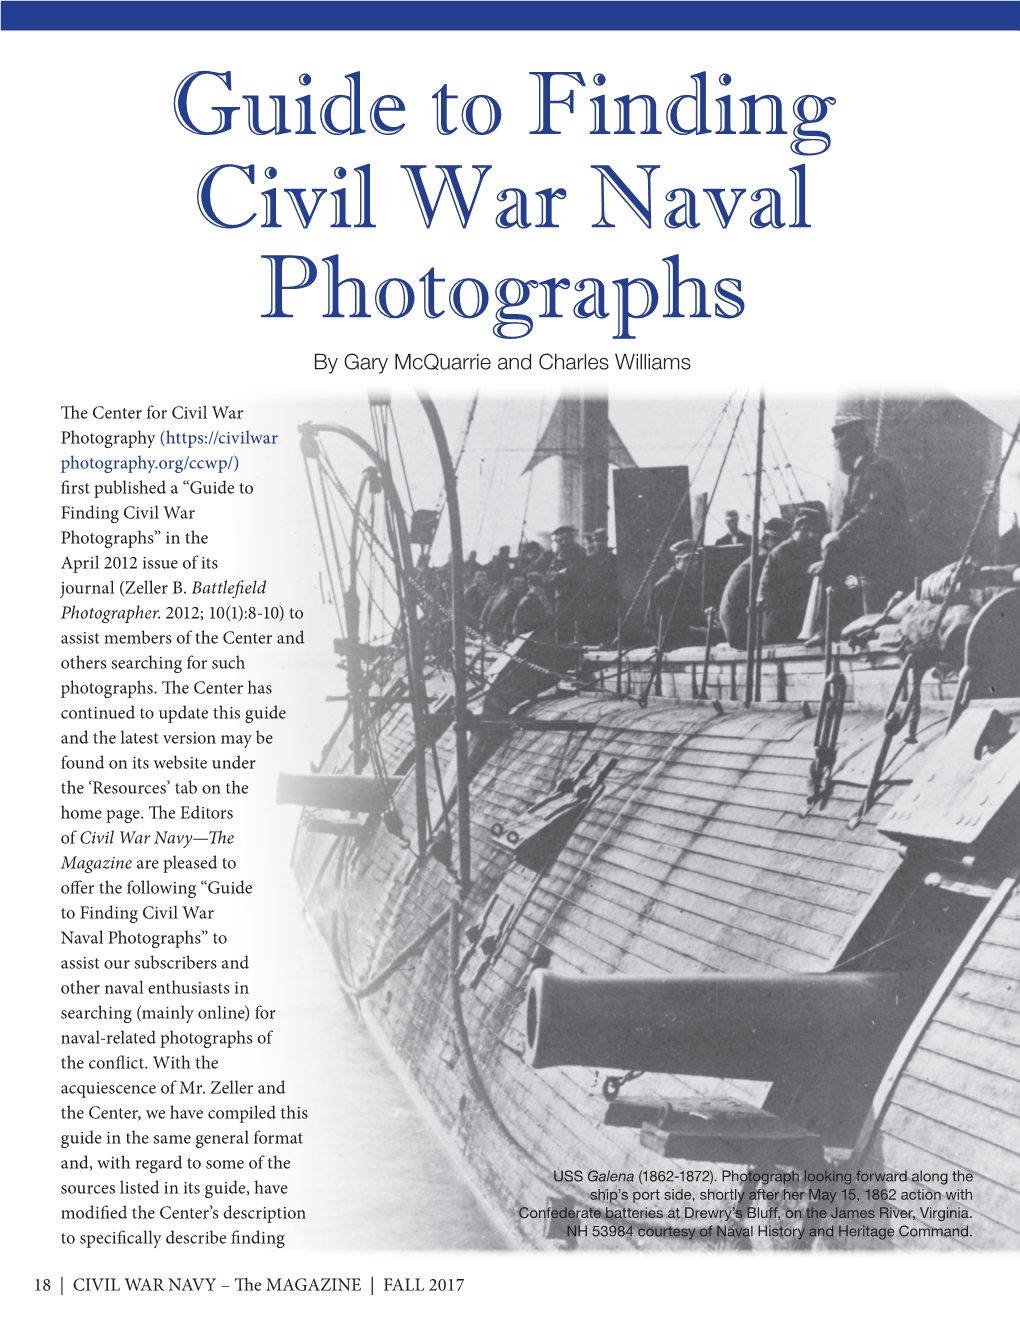 Guide to Finding Civil War Naval Photographs by Gary Mcquarrie and Charles Williams